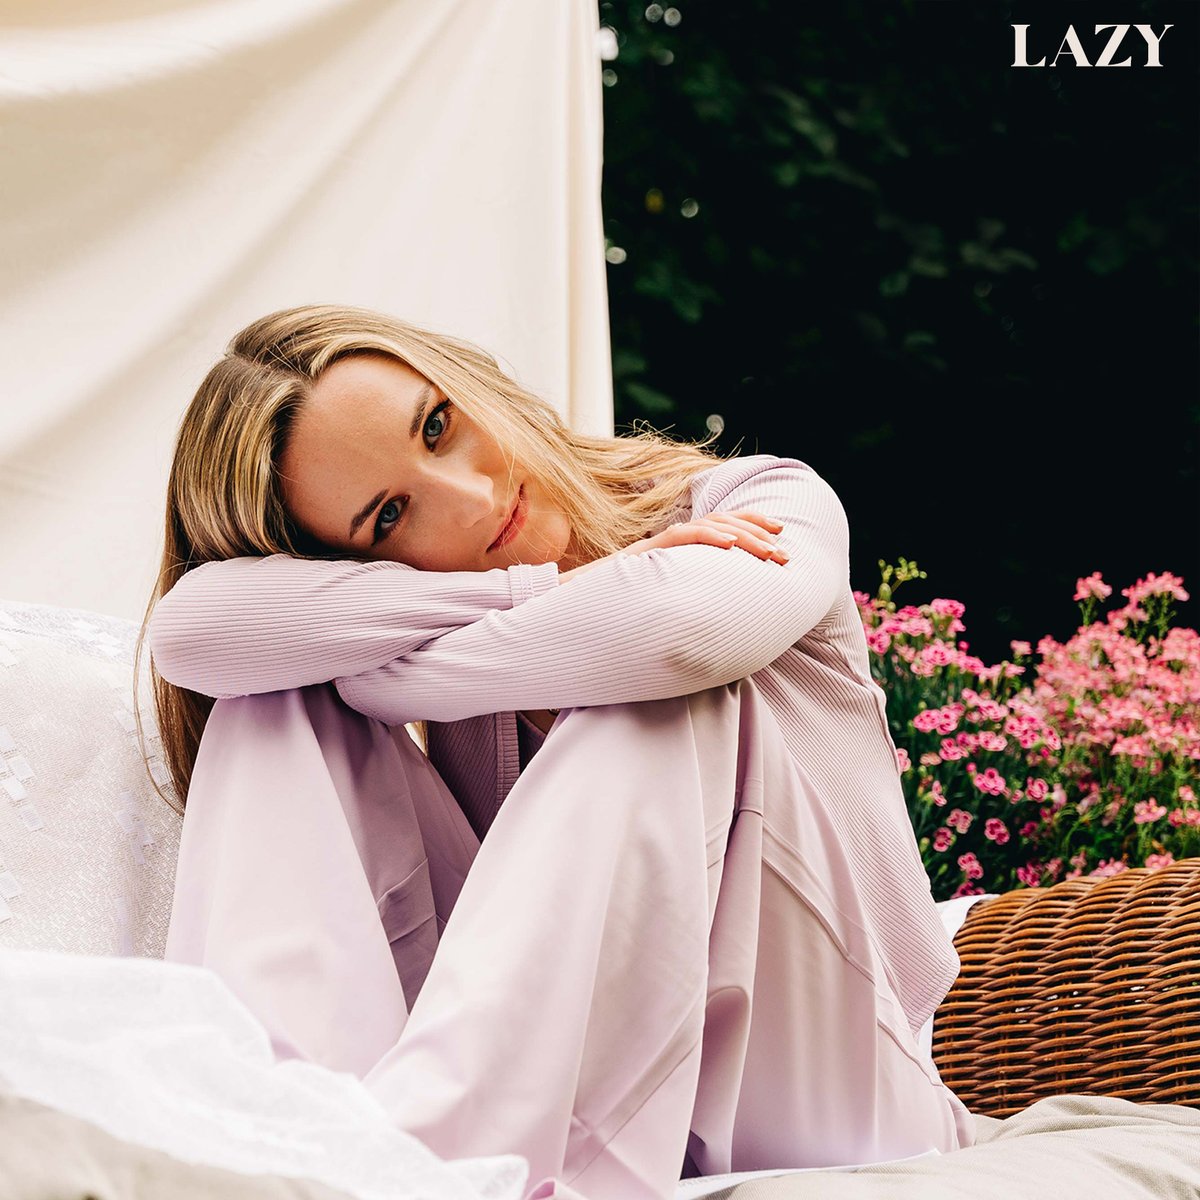 So happy to share that my new single 'Lazy' will be out next Thursday the 28th of October! I worked on this song over lockdown with @AOKguitar . I really love it and hope you will too. Pre-save link in my bio 💜